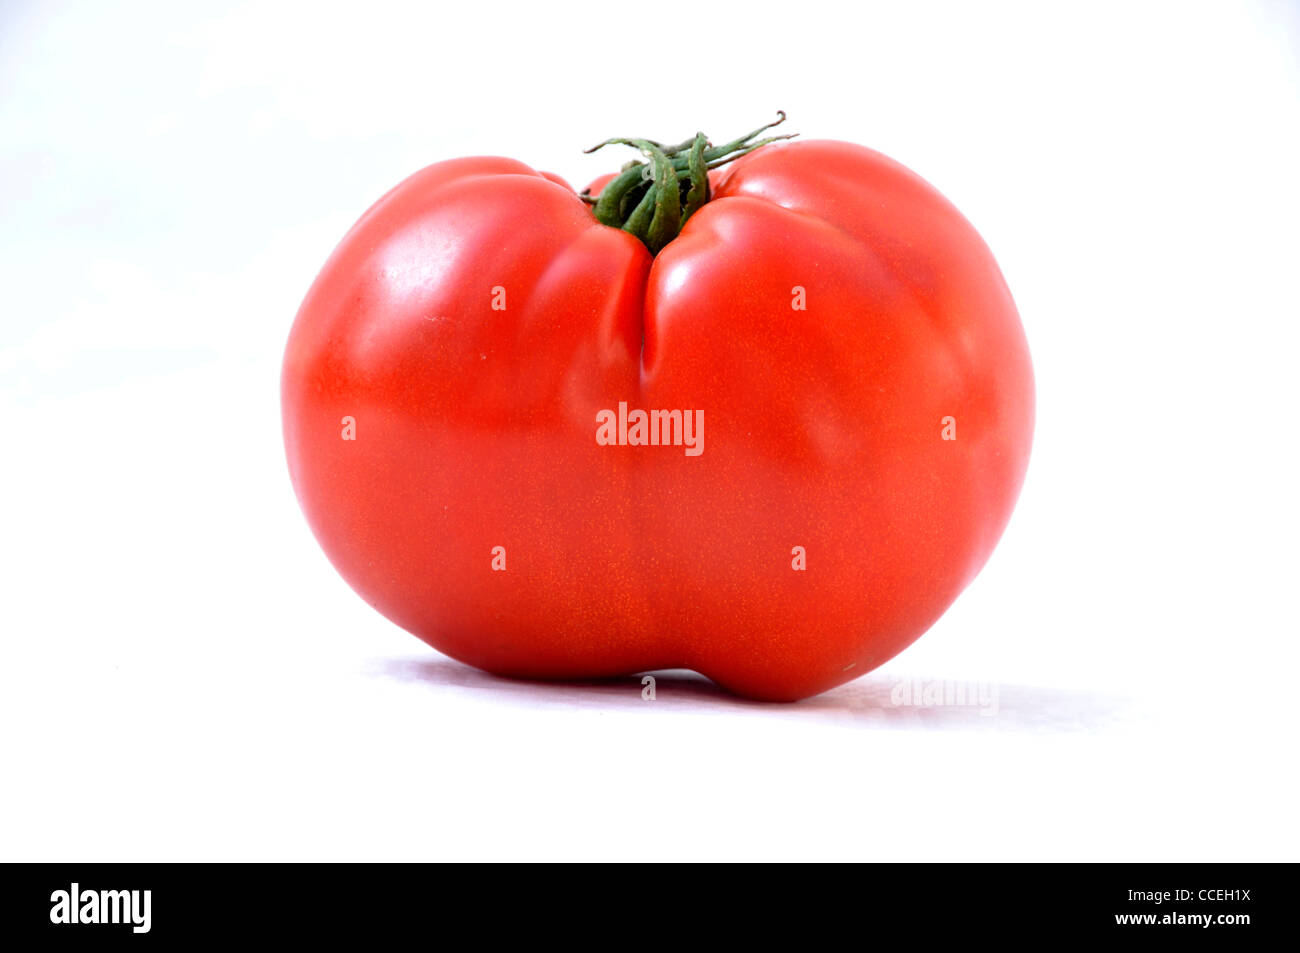 A tomato (variety: Marmande) close-up on a white Fund. Stock Photo